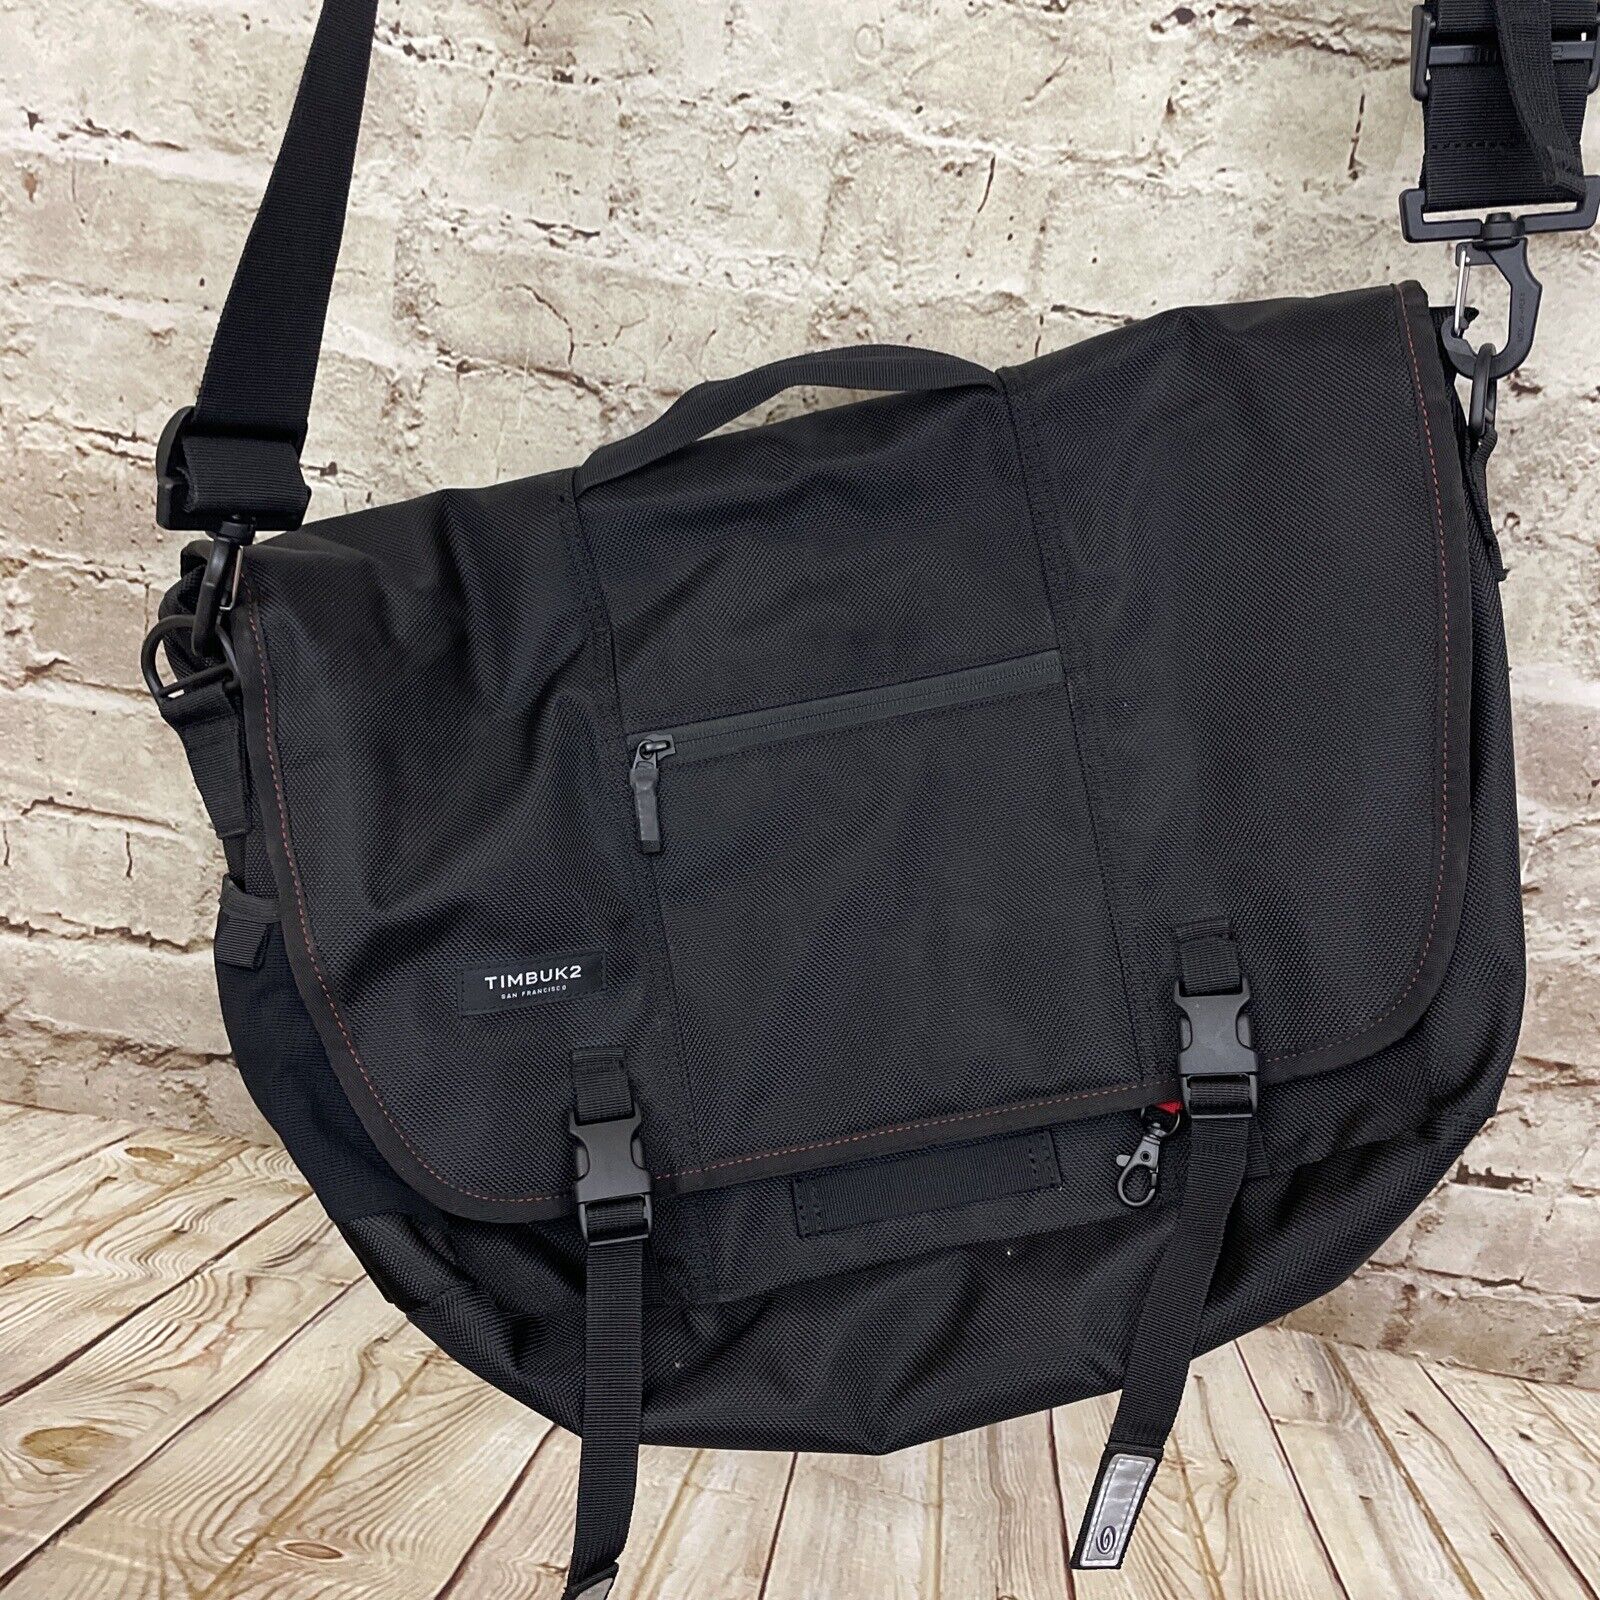 Timbuk2 Meta Messenger 15 gently used in great condition Medium